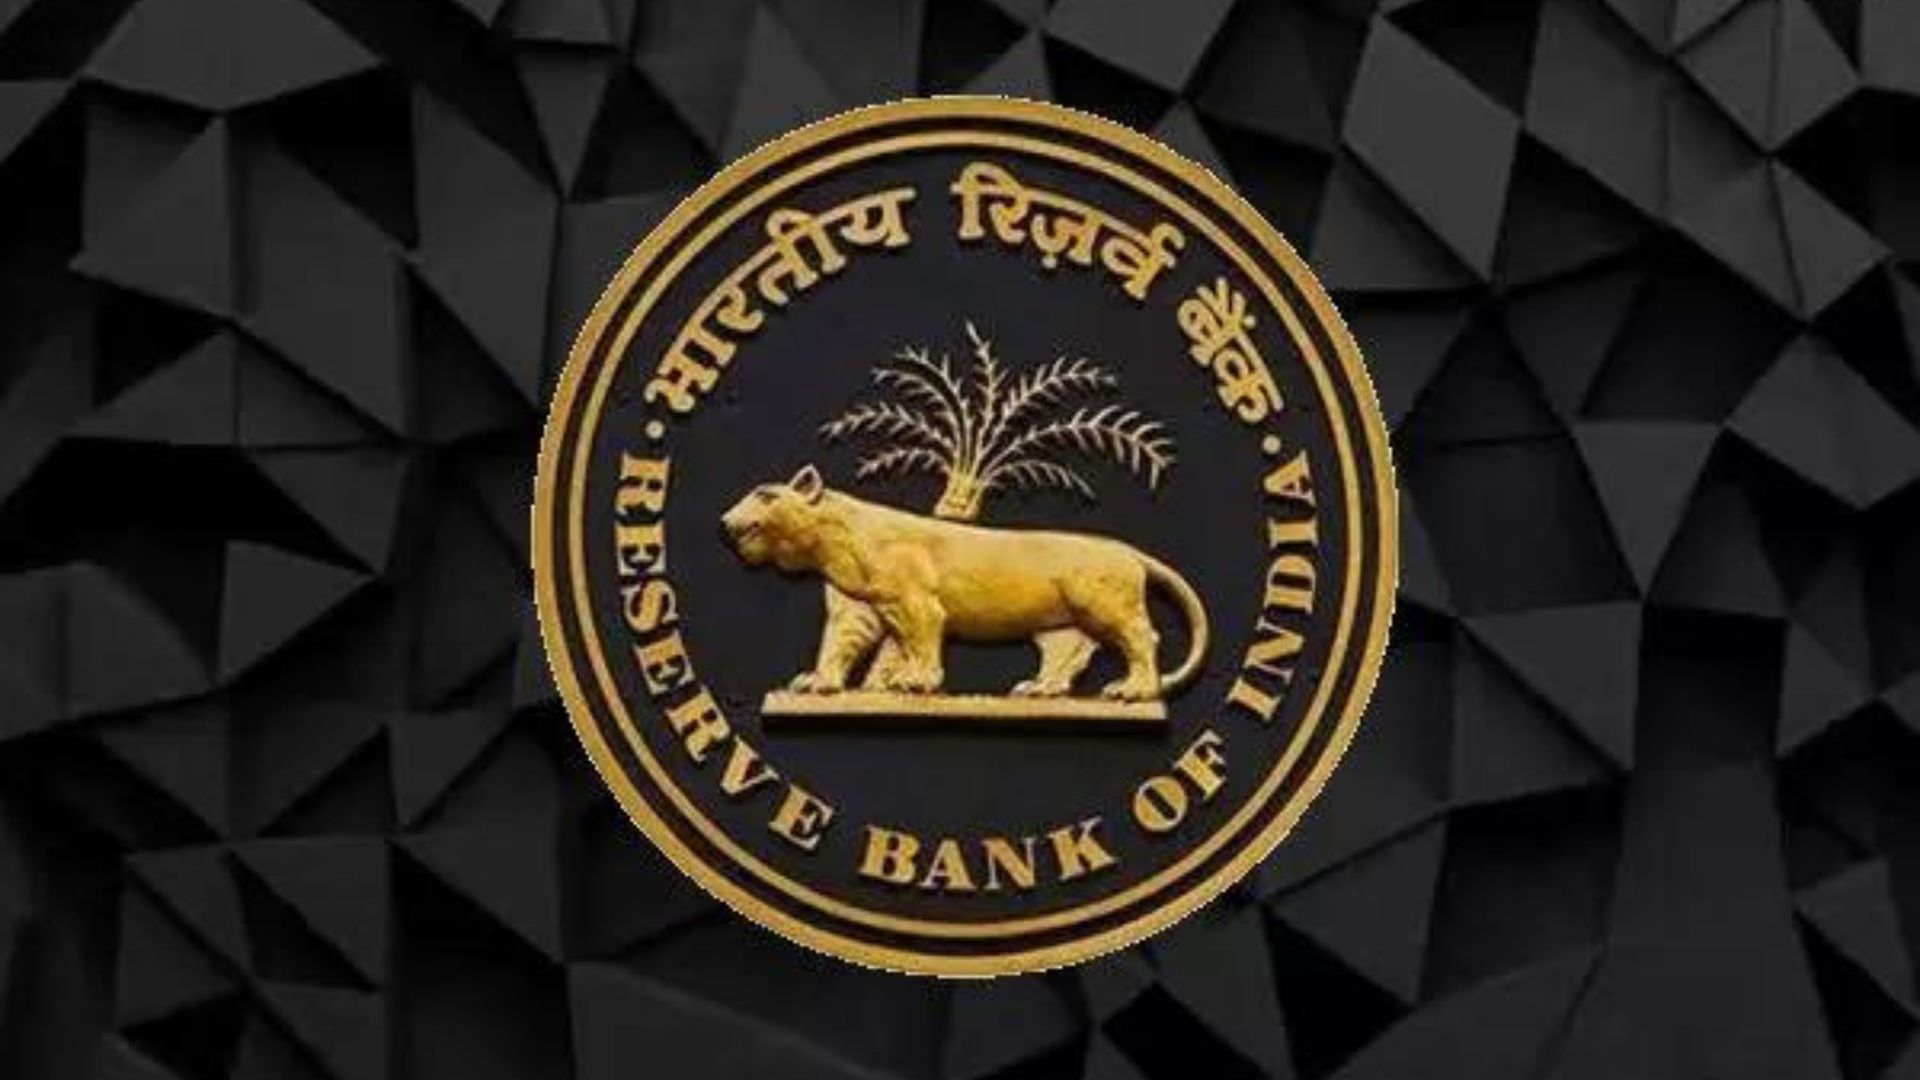 Fitch Alert: RBI’s Warning on Non-Bank Lenders Sparks Market Turbulence